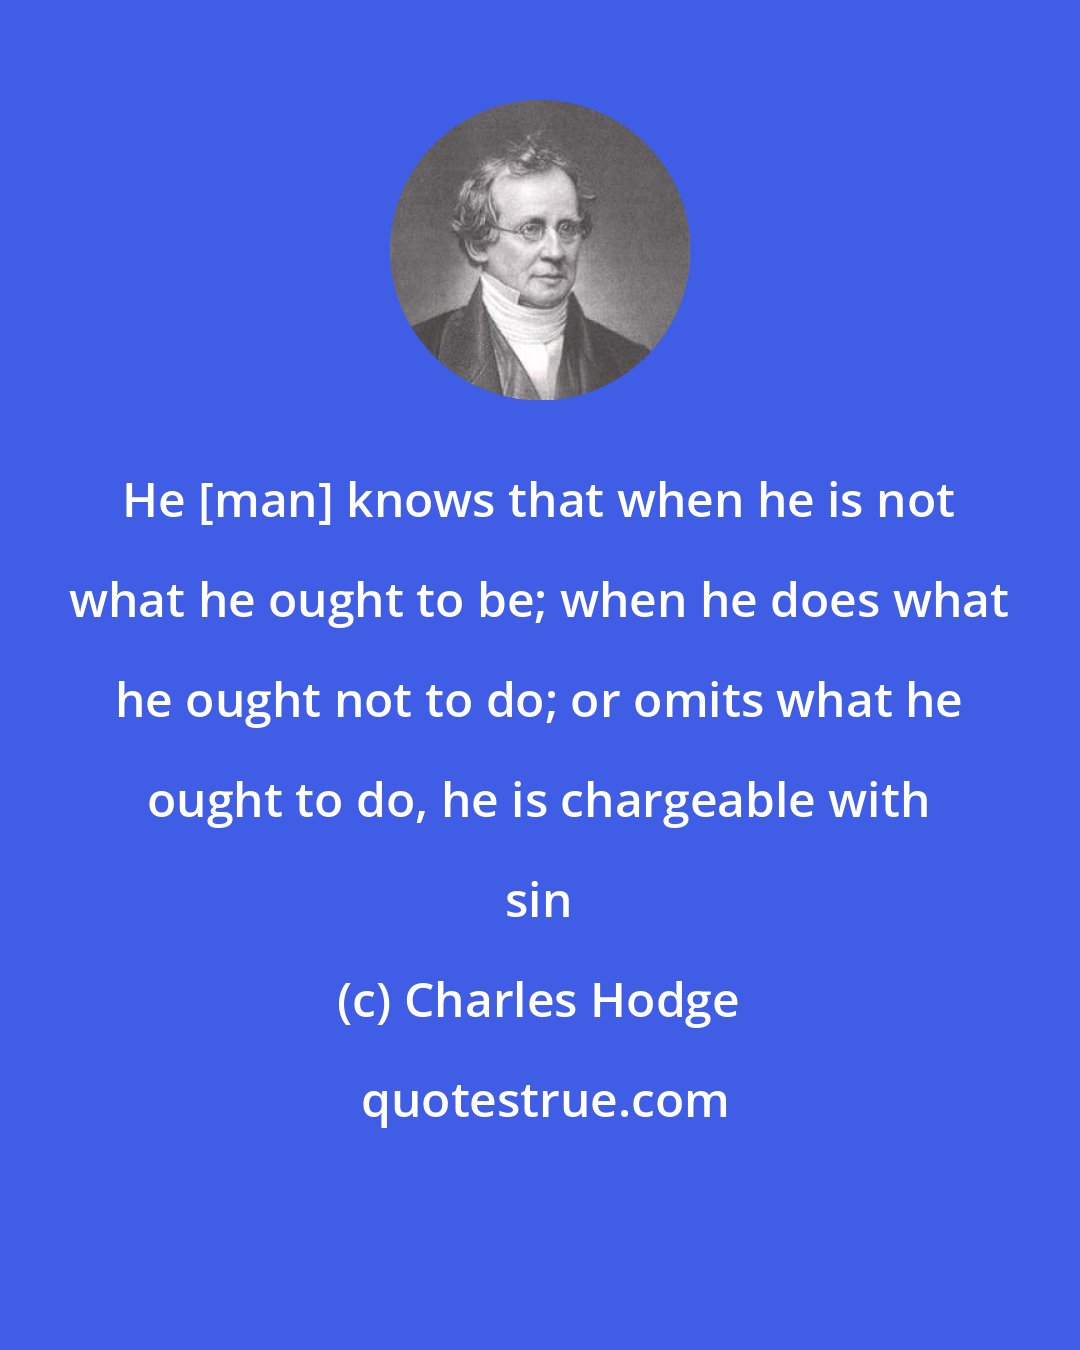 Charles Hodge: He [man] knows that when he is not what he ought to be; when he does what he ought not to do; or omits what he ought to do, he is chargeable with sin